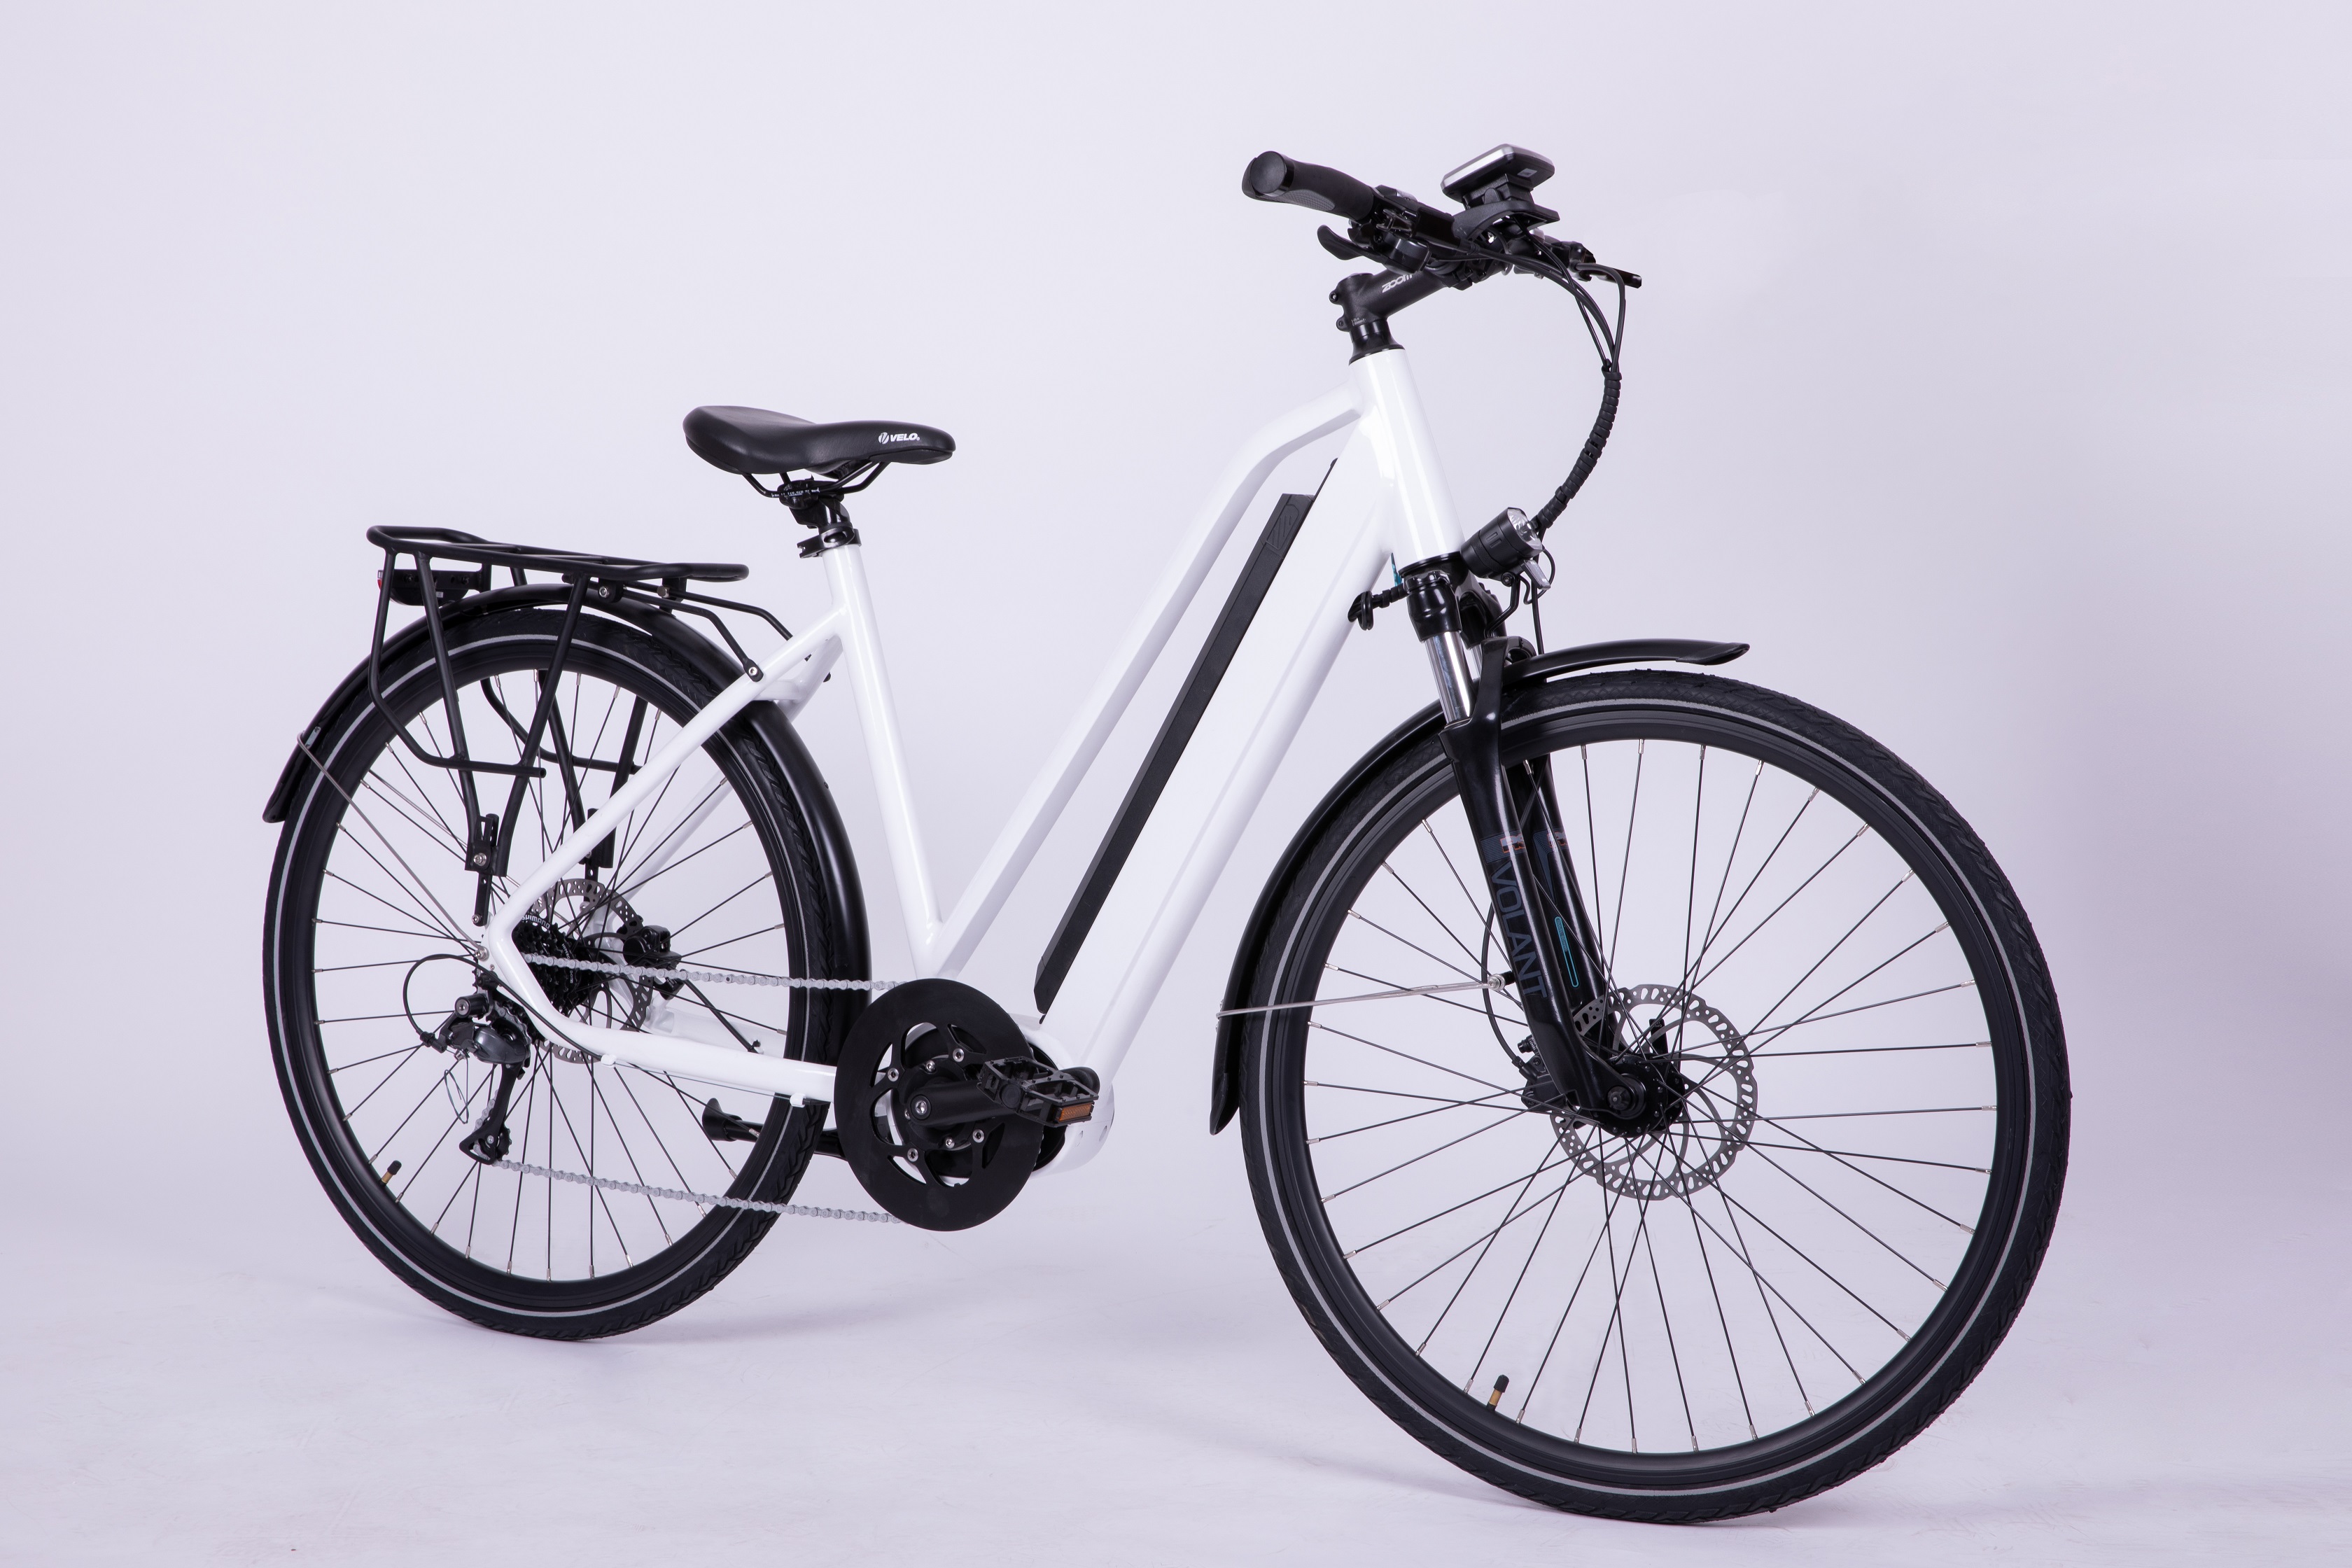 Mid-drive Electric Bike customized  geometry and color available-Juliet